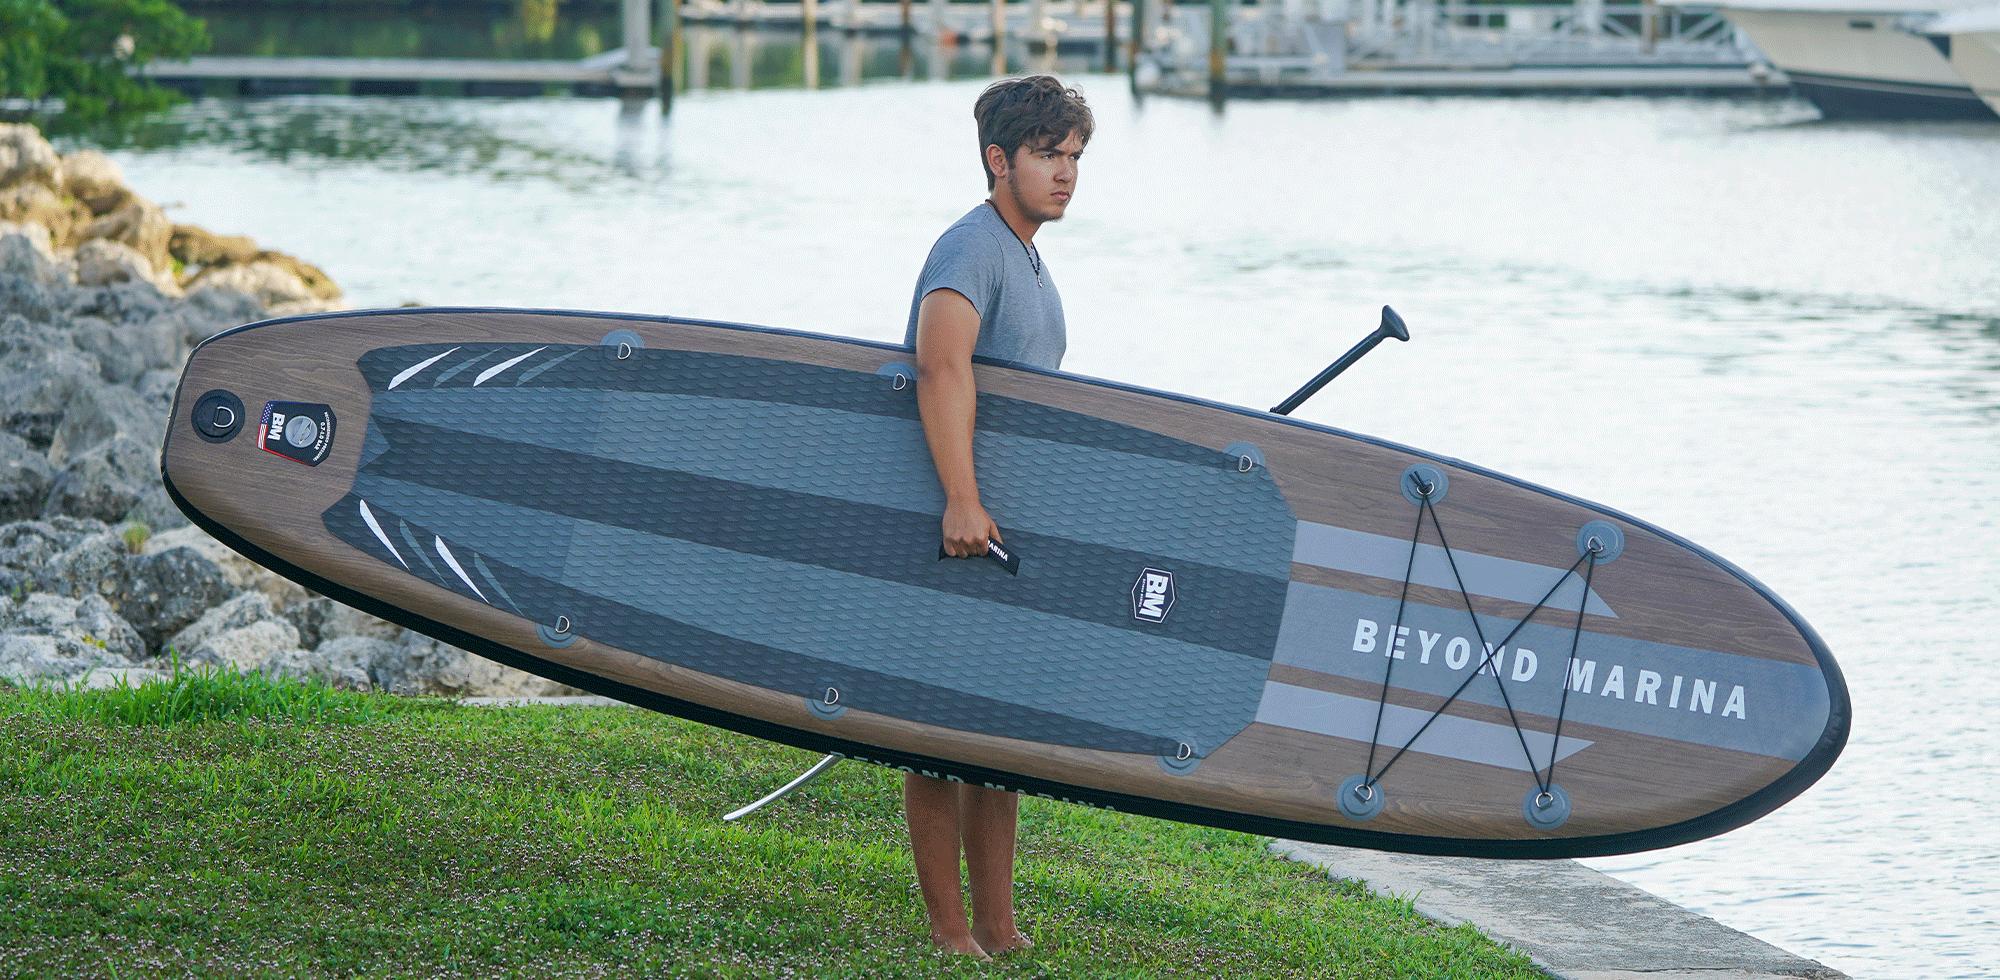 Discover the Elegance and Performance of Beyond Marina's Golf and Wooden Series Paddle Boards